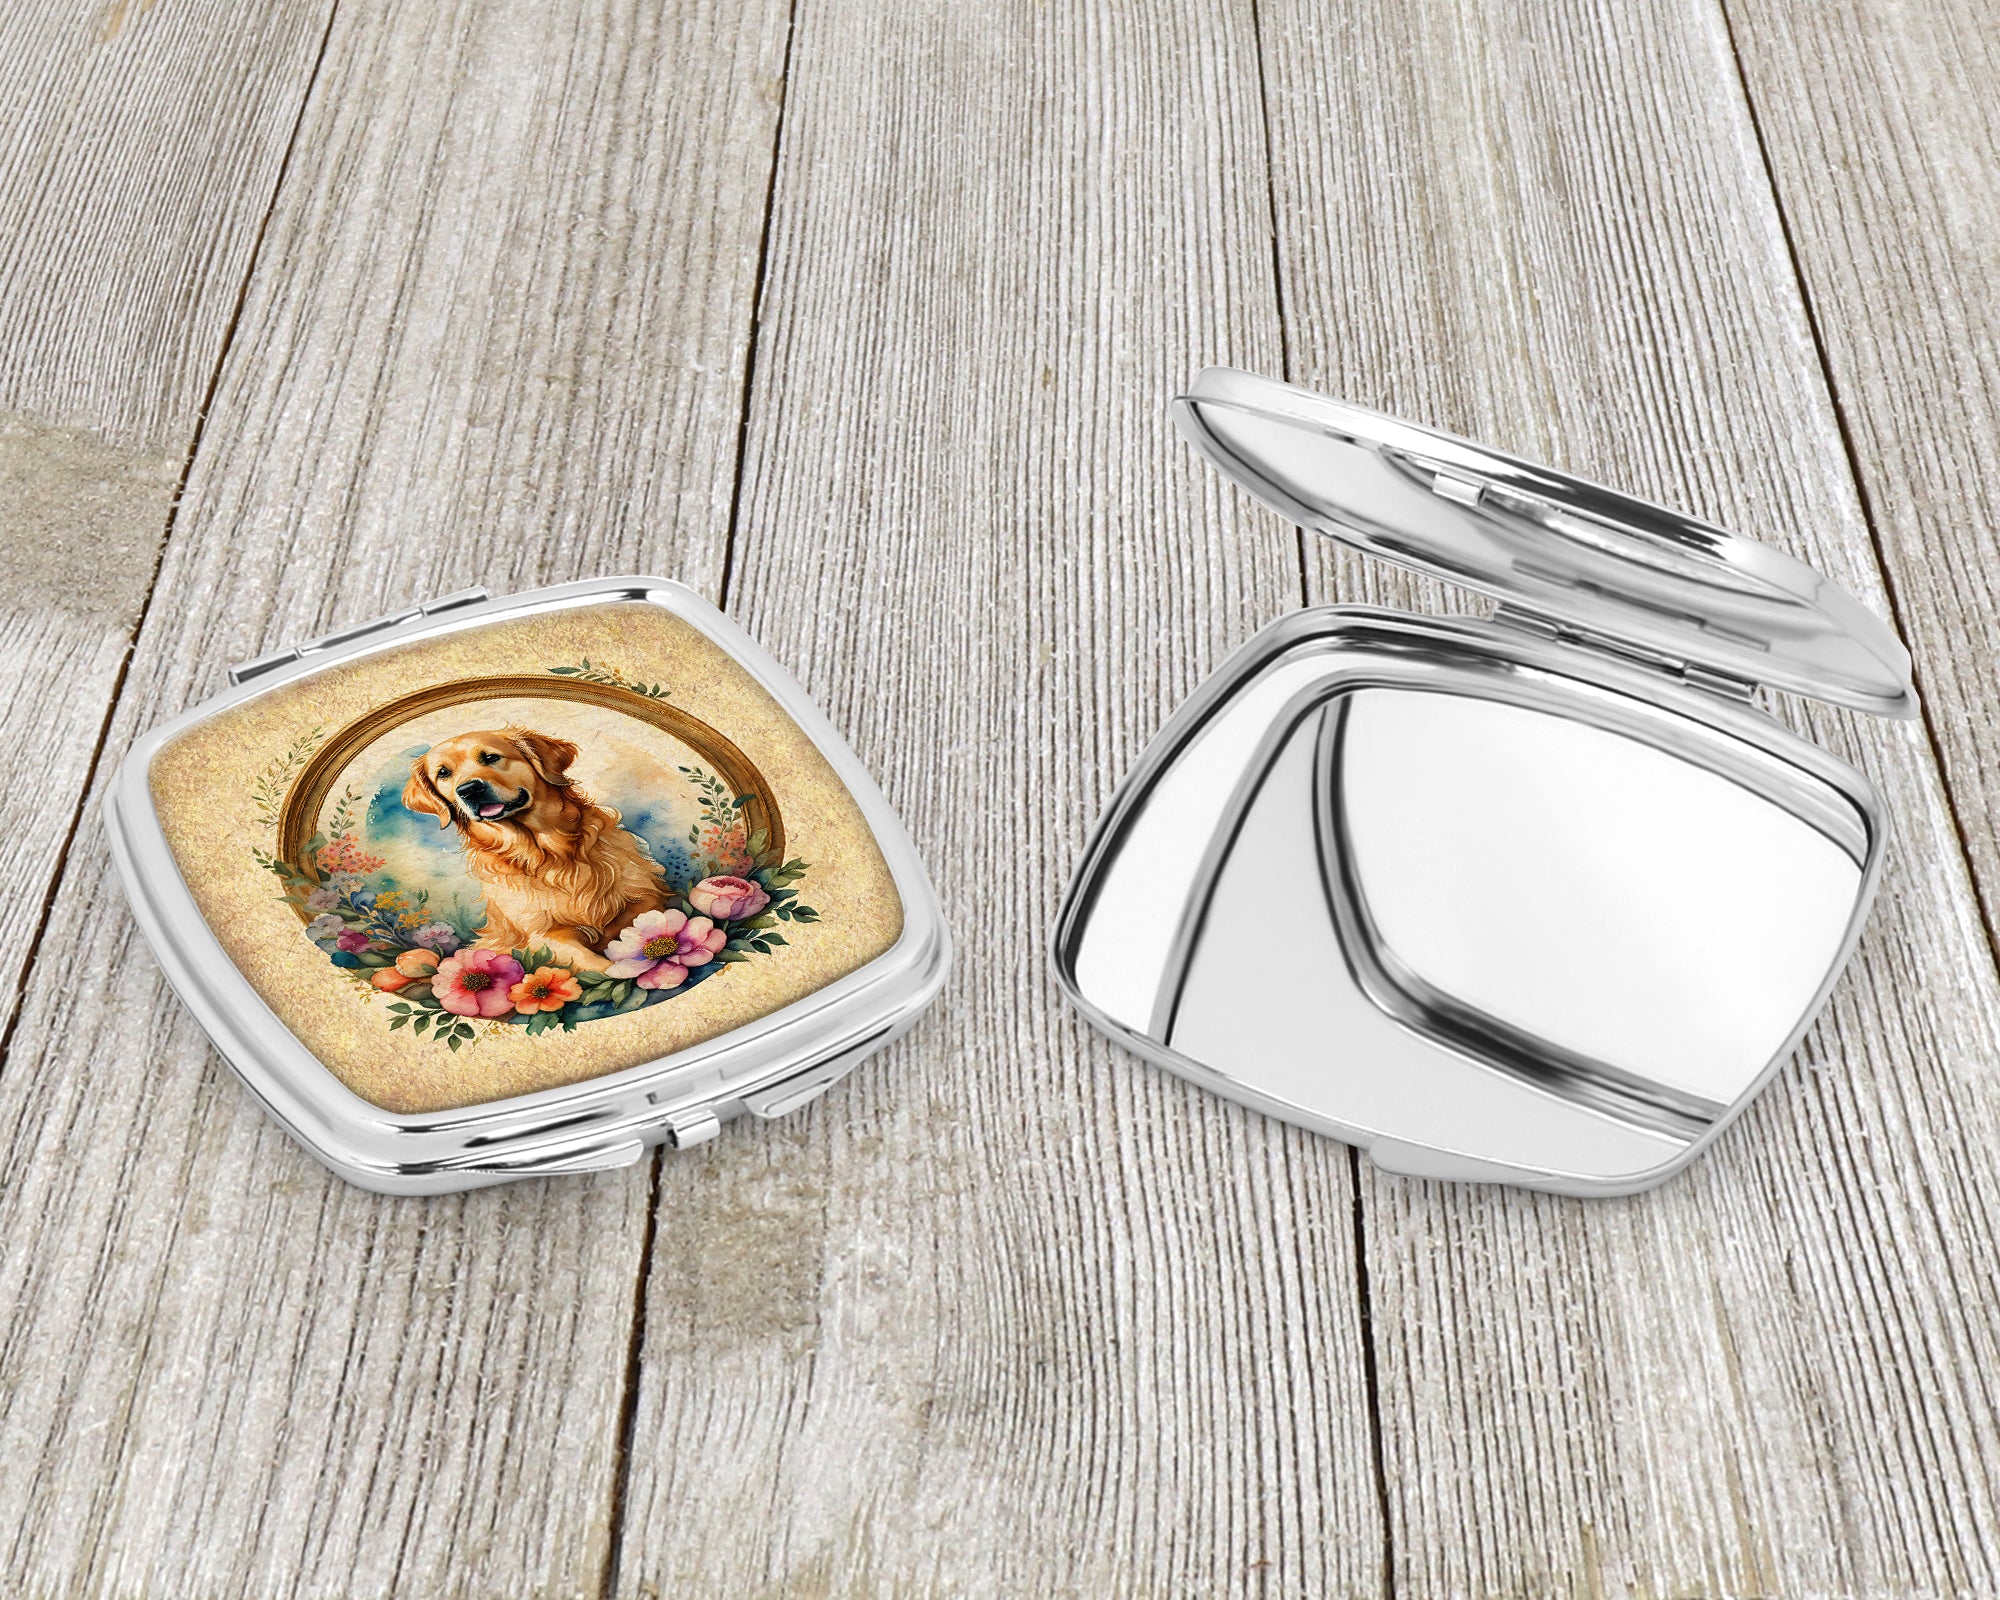 Golden Retriever and Flowers Compact Mirror